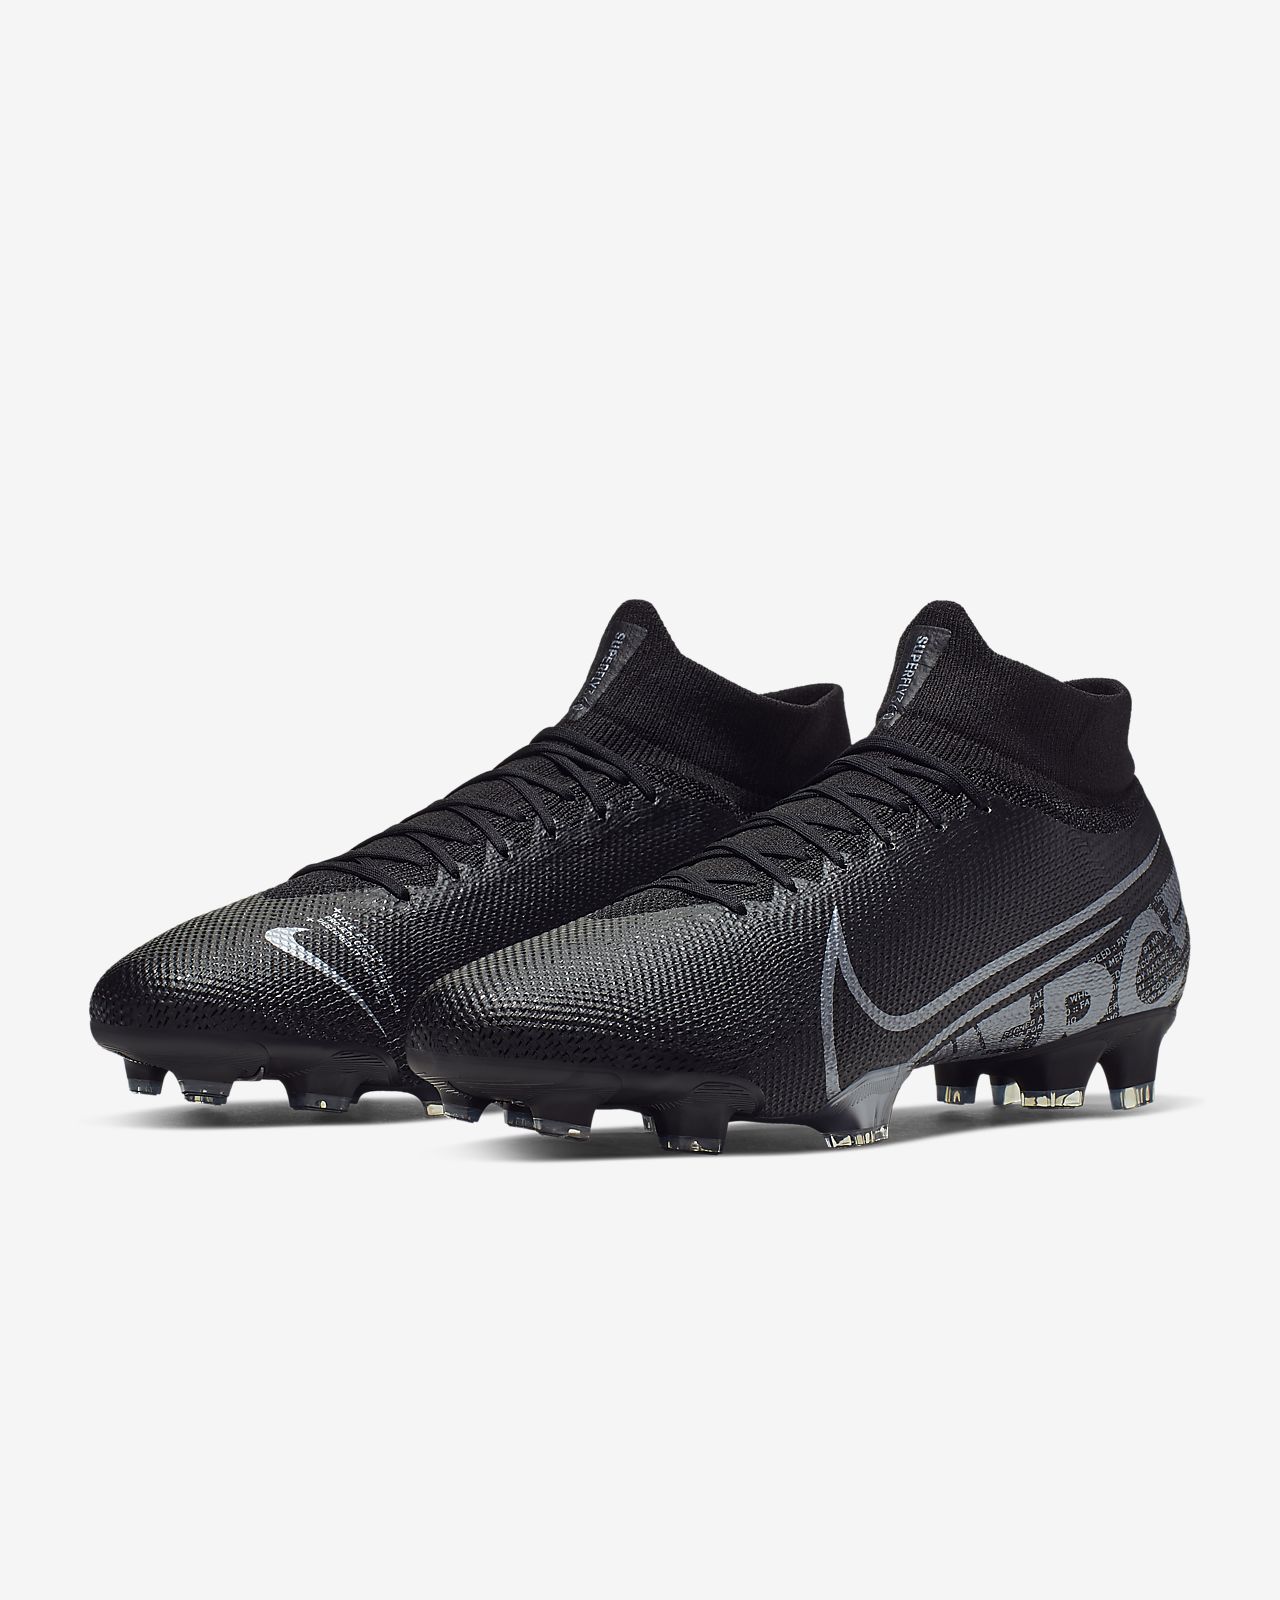 Nike Mercurial Superfly 4 CR7 Quinhentos Archives Soccer